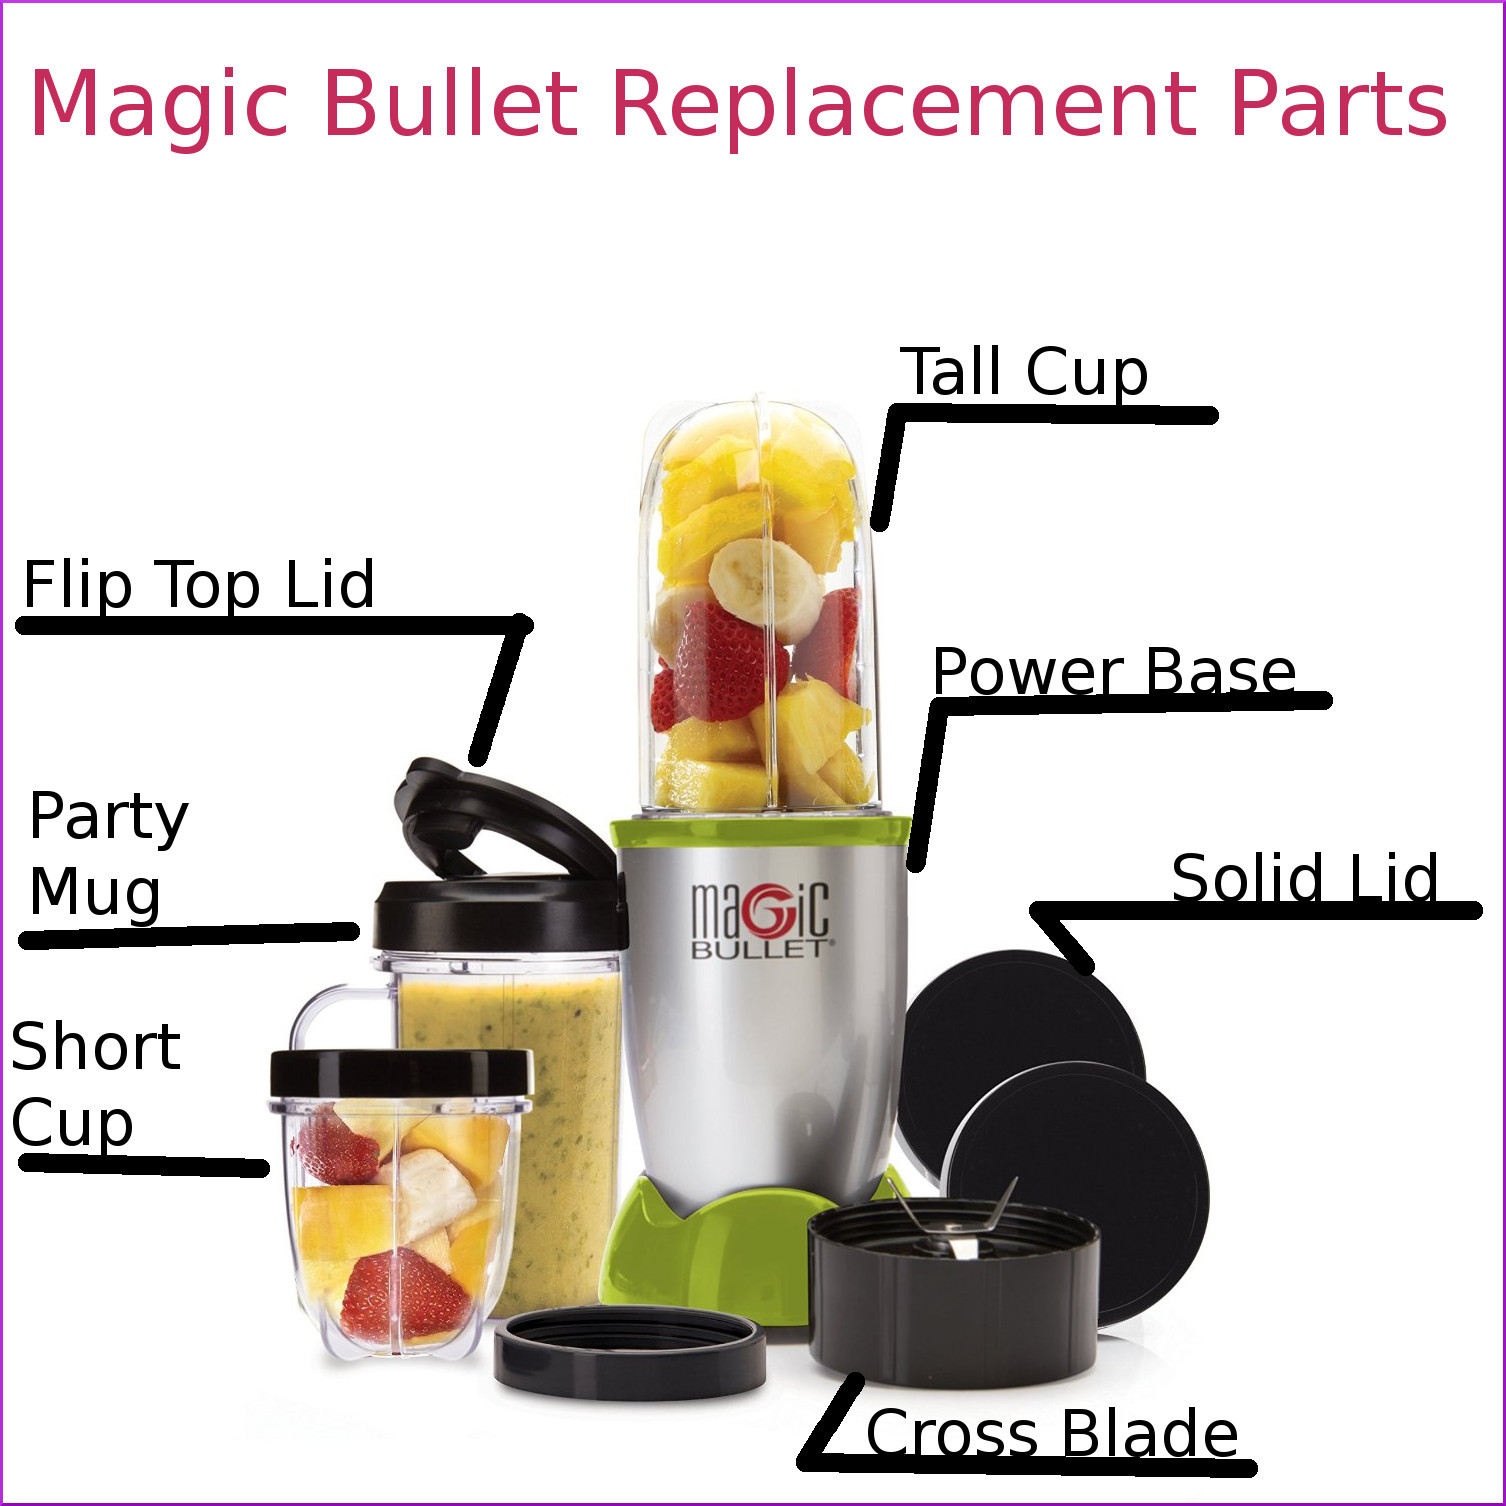 https://www.dontpinchmywallet.com/wp-content/uploads/2016/05/magicbullet-replacementparts.jpg